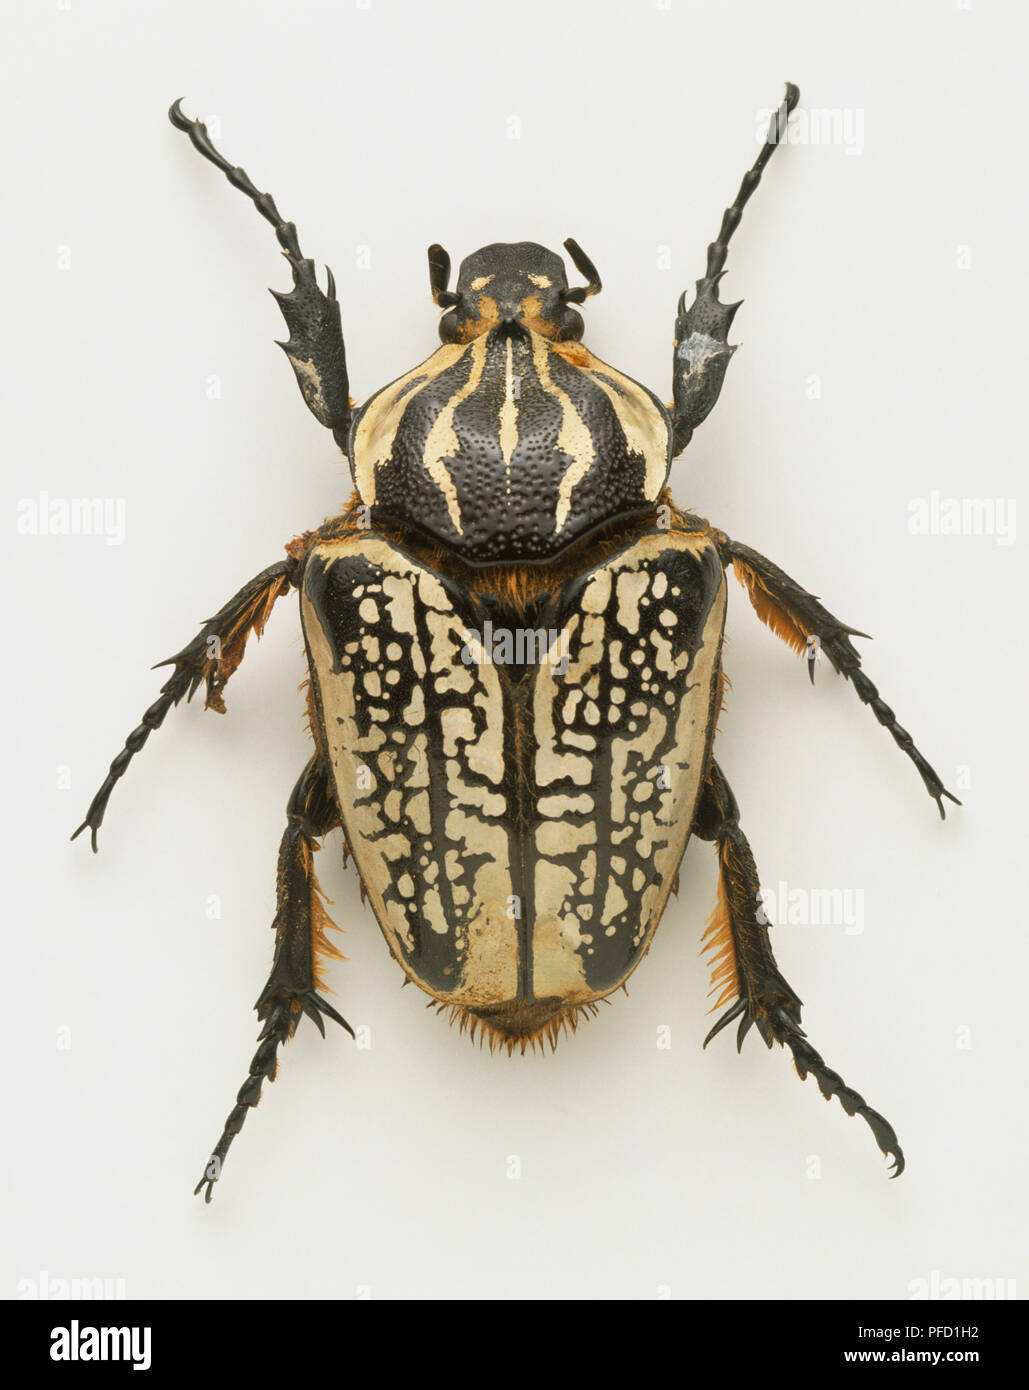 Above view, female Goliath Beetle, or Goliathus meleagris with its striped carapace. Stock Photo